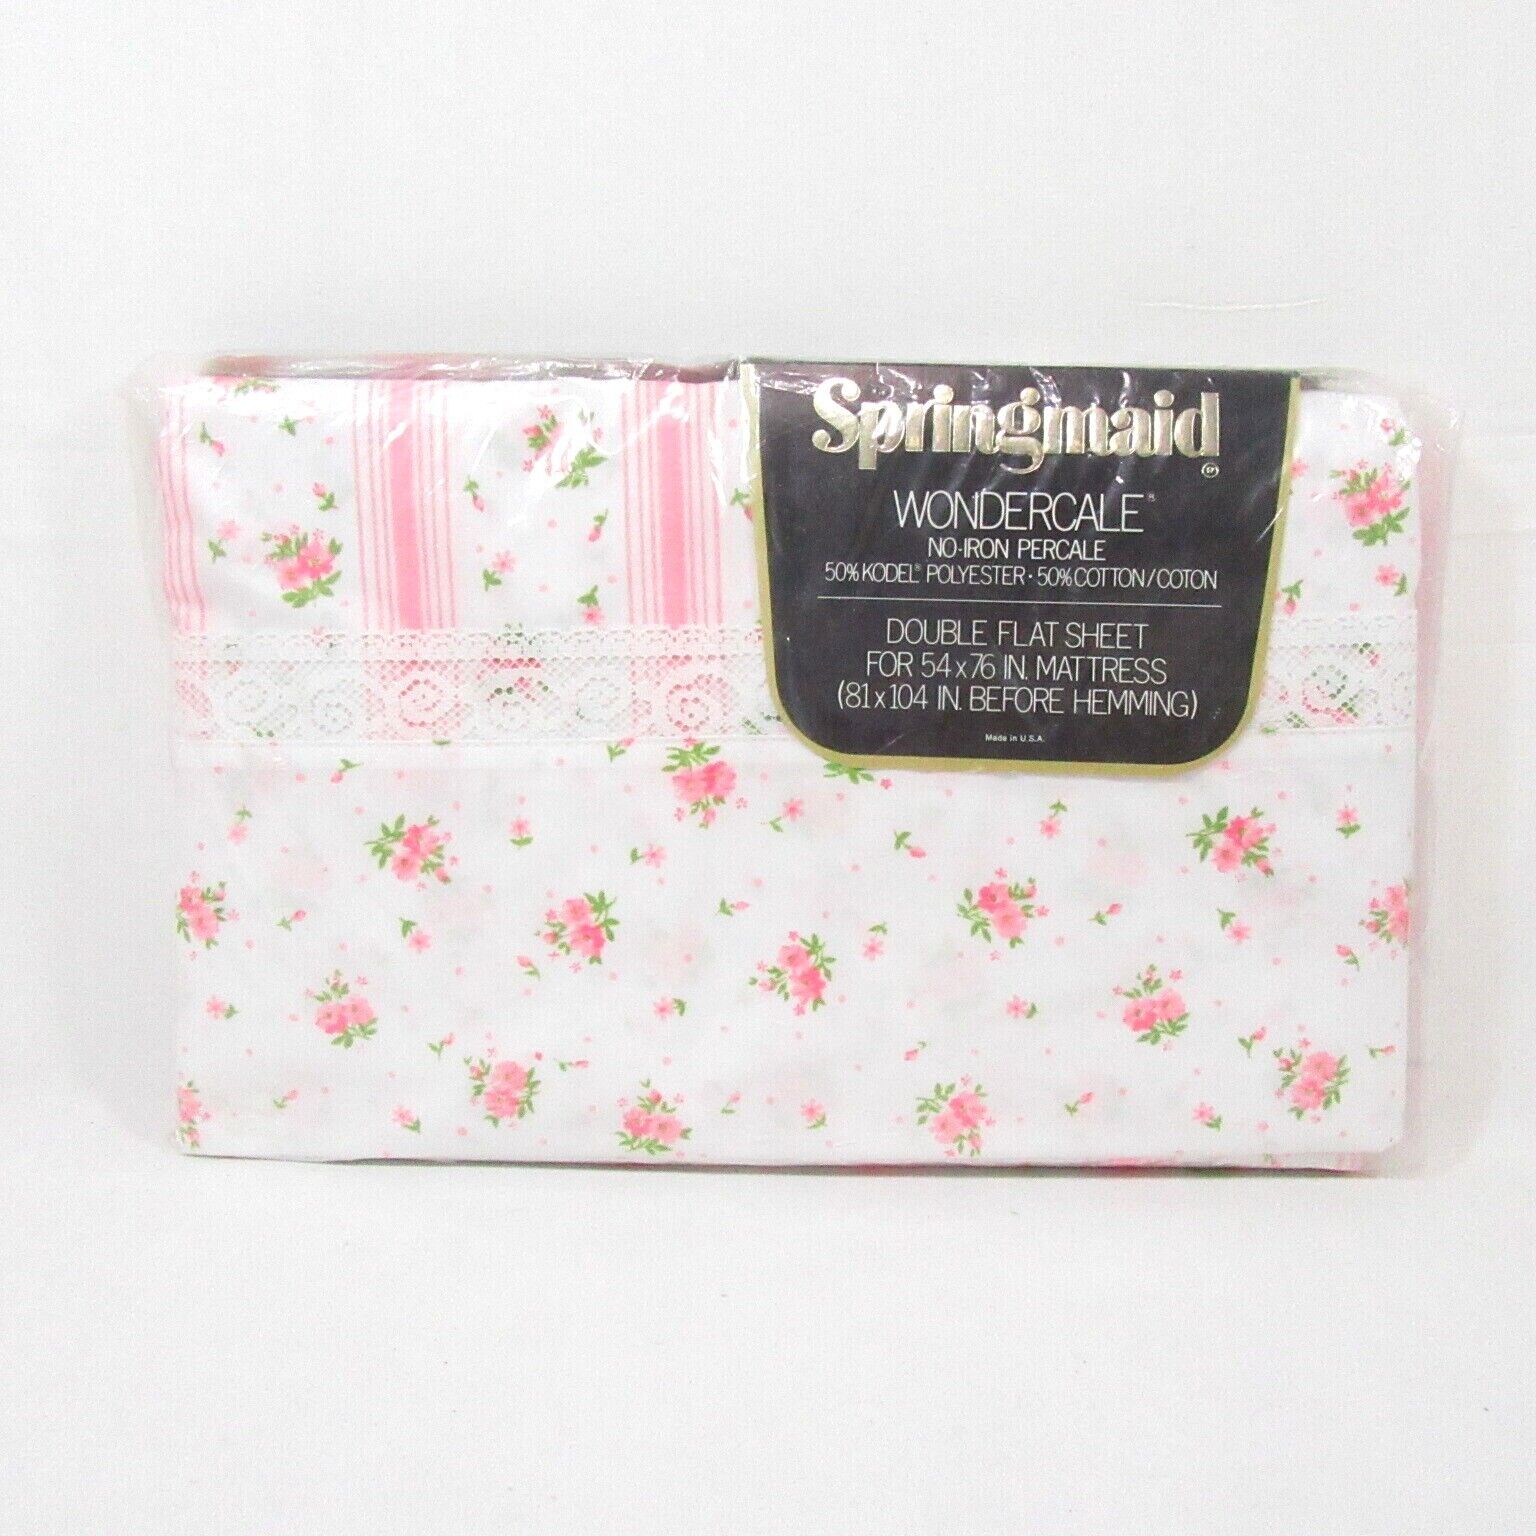 SPRINGMAID Dimity Delight Floral Stripe Pink Lace Trim Full/Double Flat Sheet - $40.00